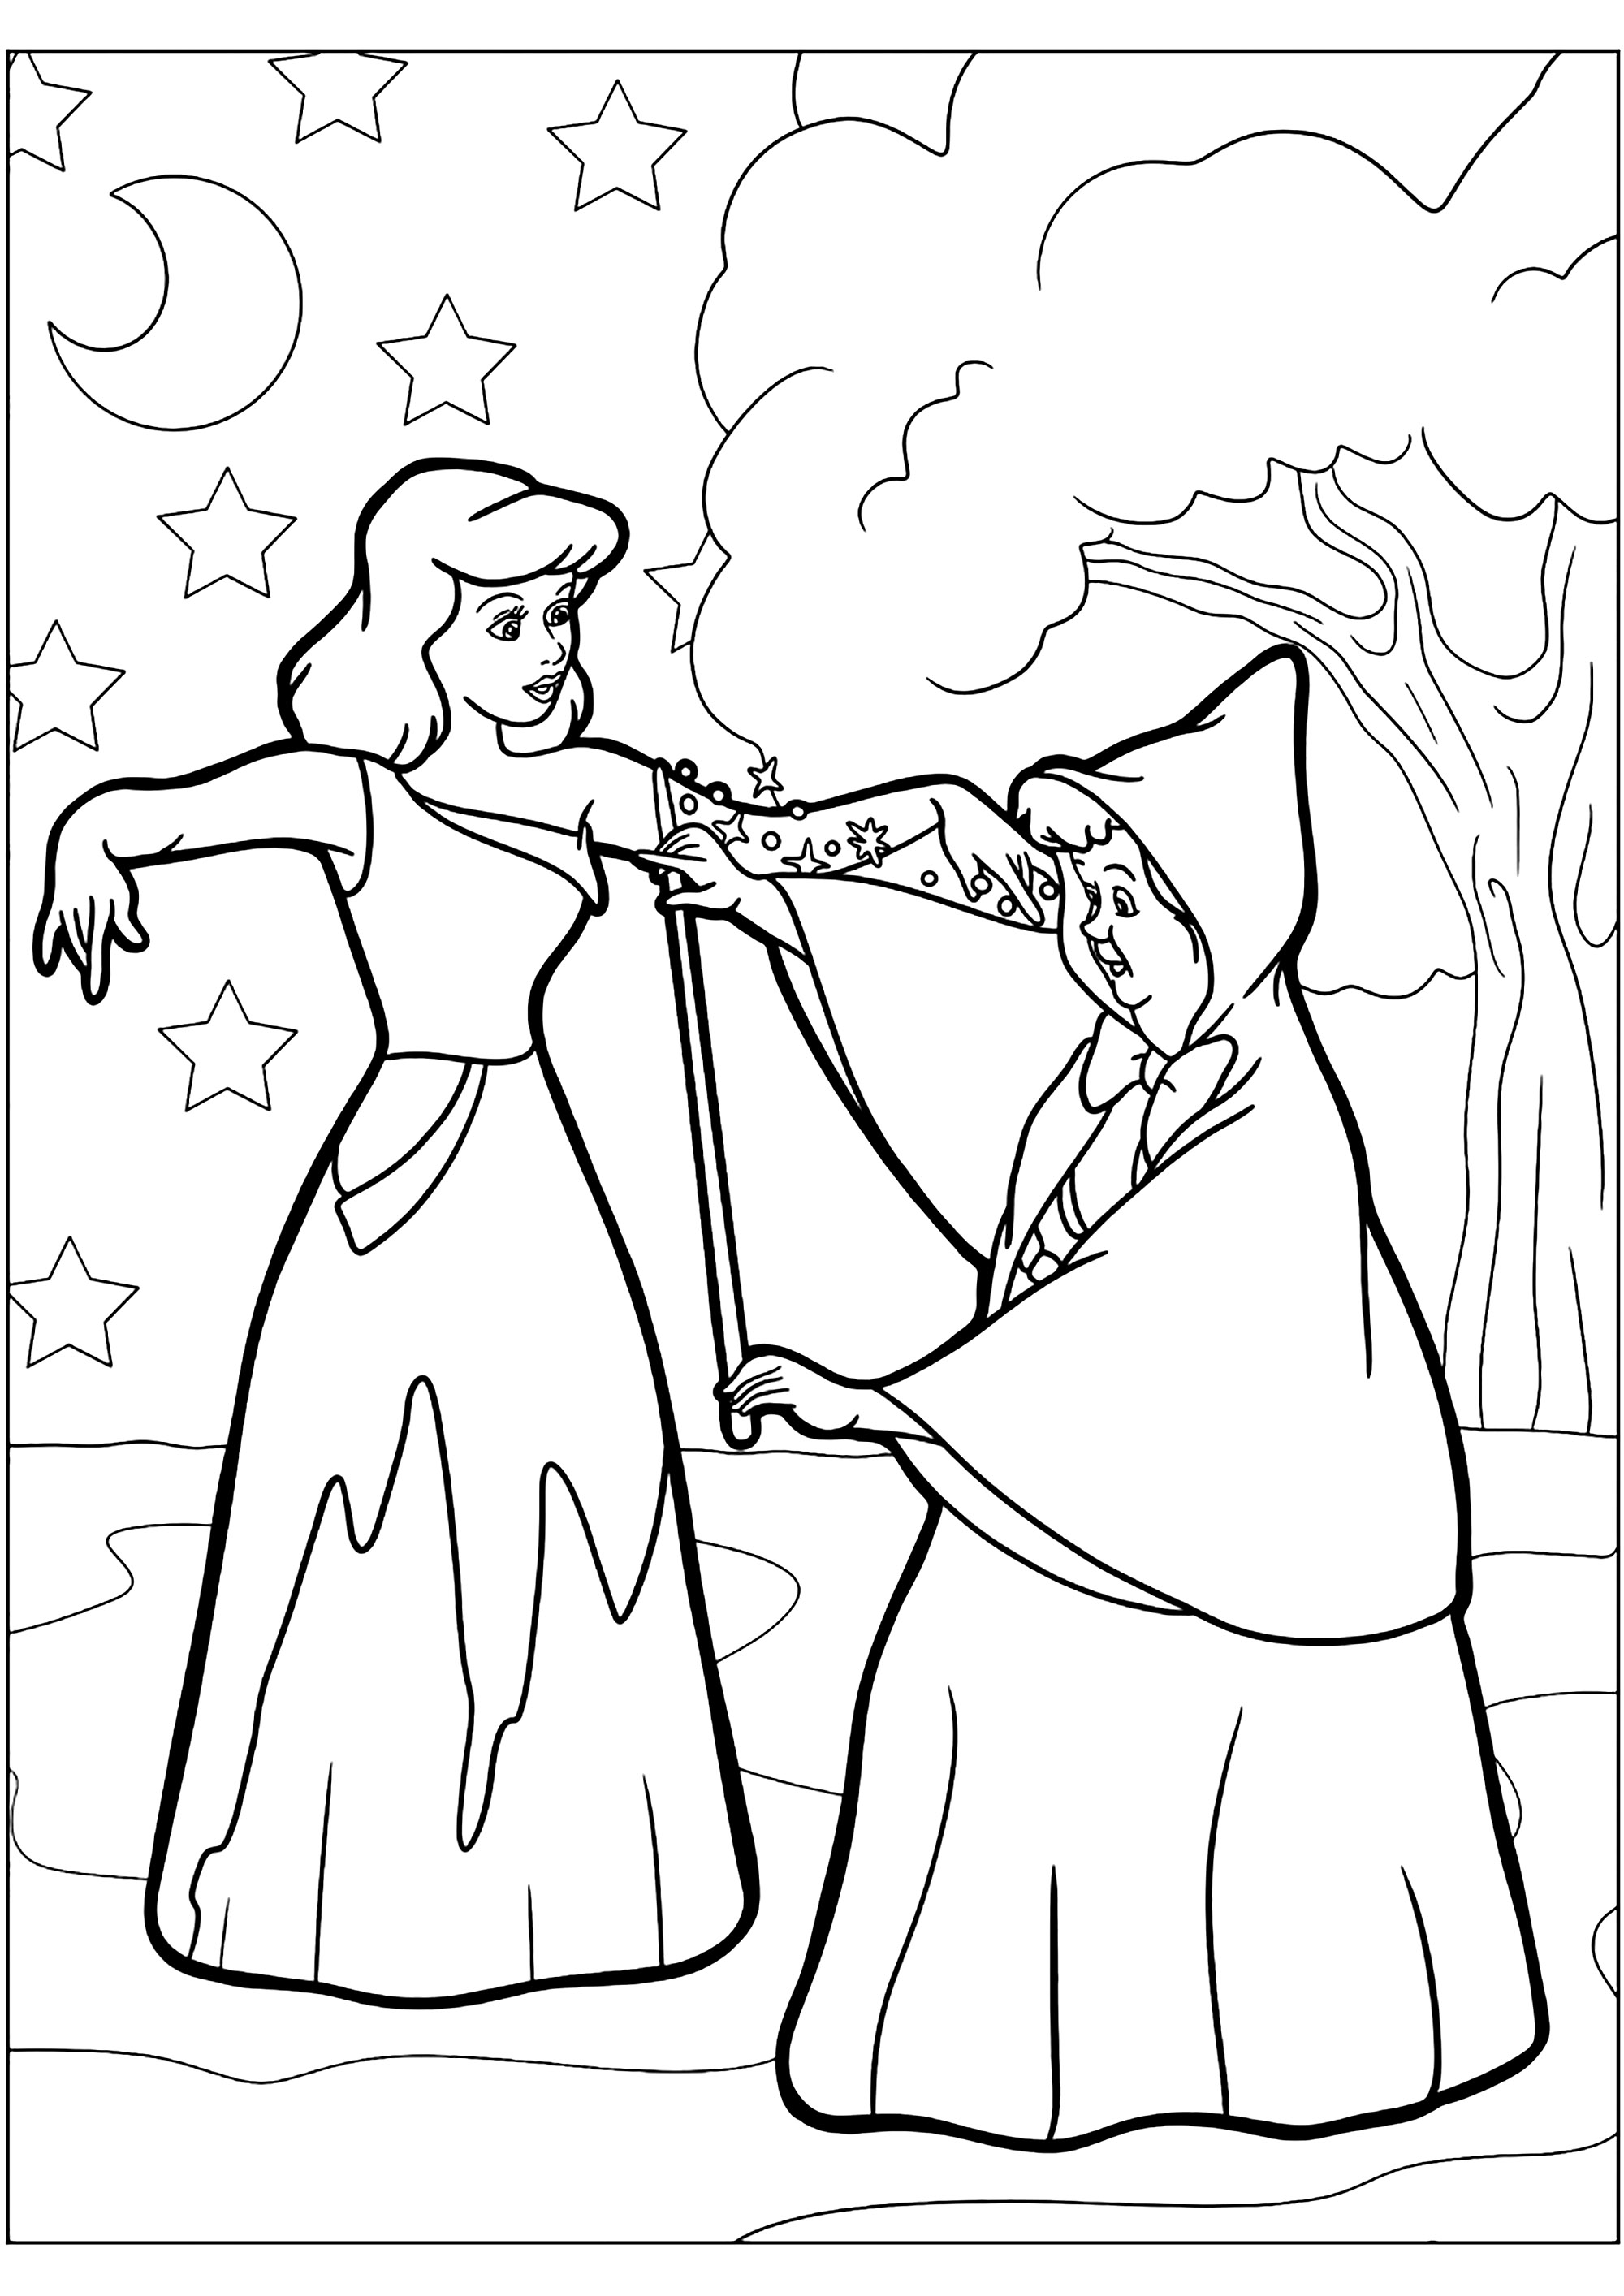 Cinderella coloring page to print and color for free